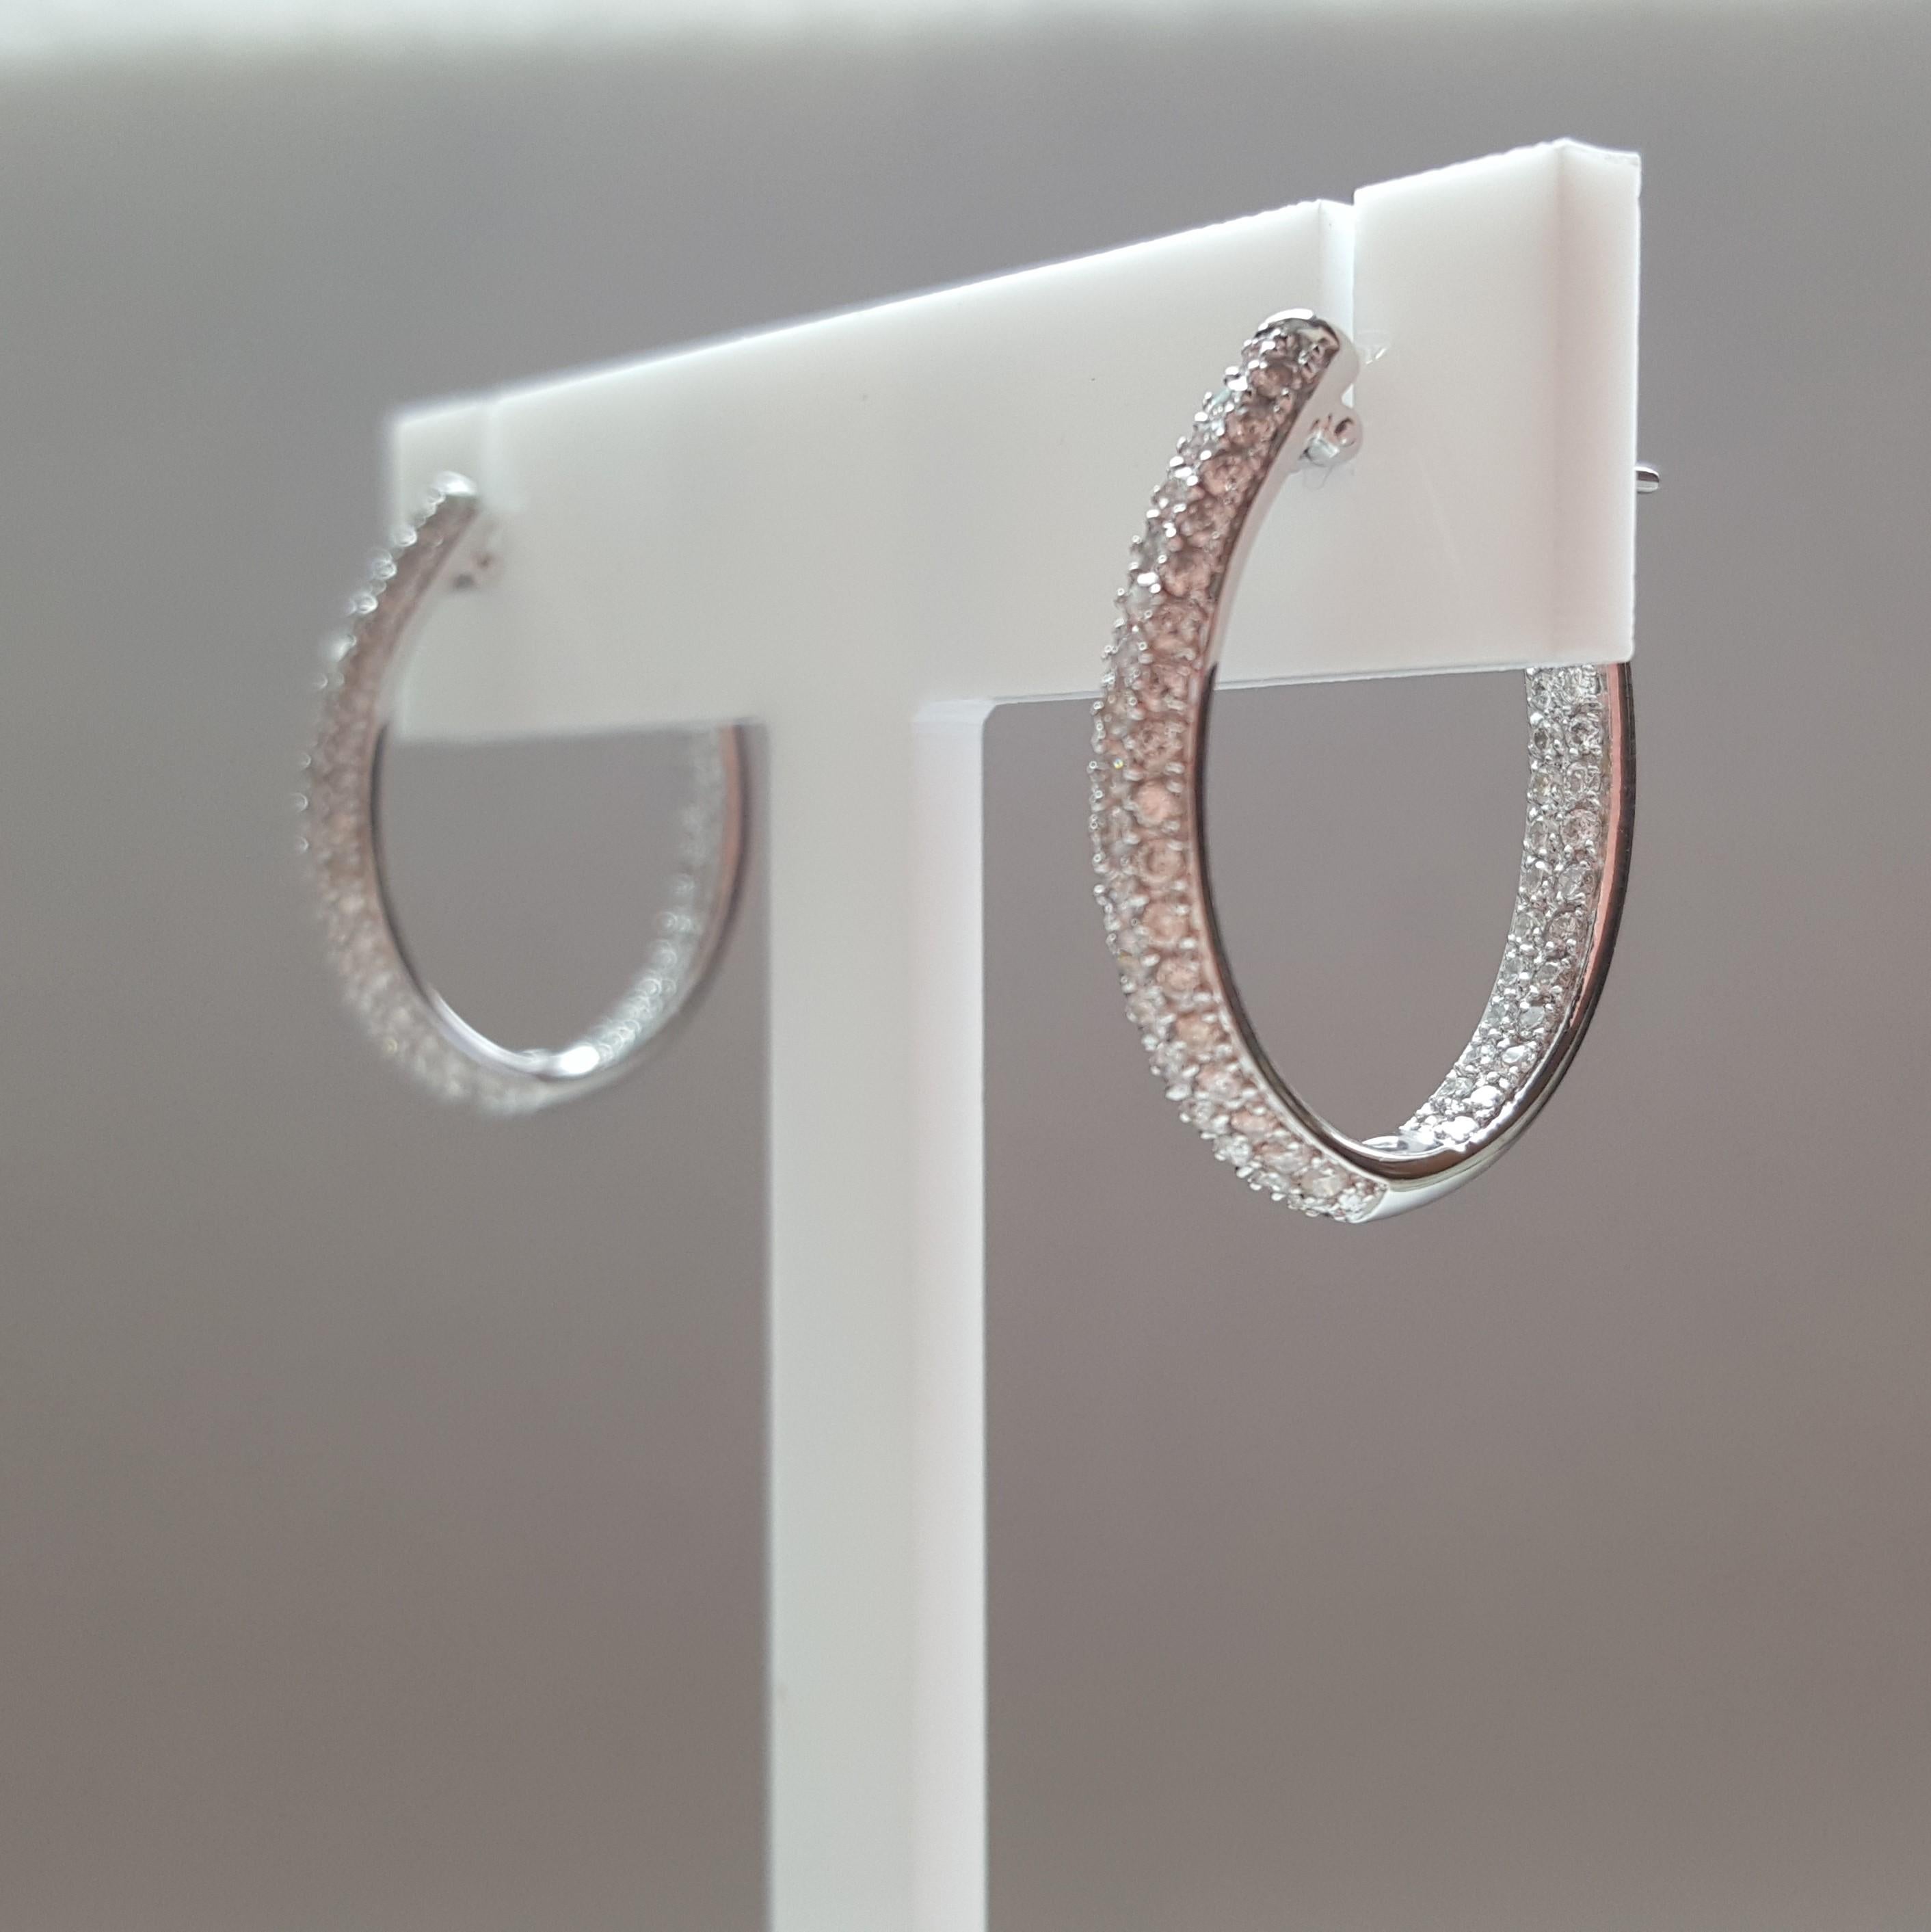 18kt white gold round brilliant diamond pave diamond hoop earrings, inside-outside style, designed by Tech Line Jewelry; these earrings are 24mm long by 3.3mm wide. The round brilliant diamonds are of good quality, H/I color, and SI in clarity.